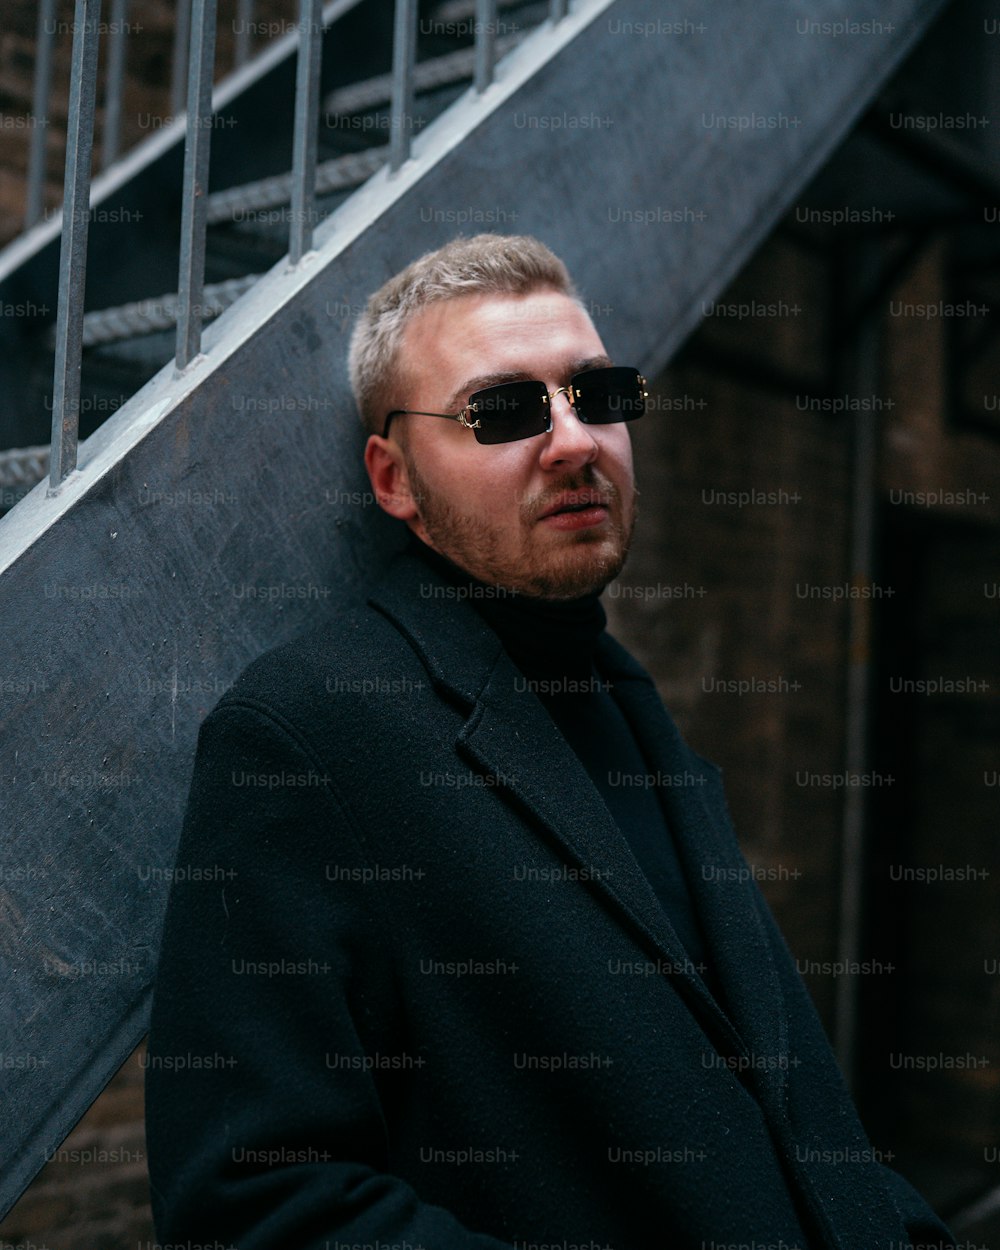 a man wearing sunglasses standing next to a stair case